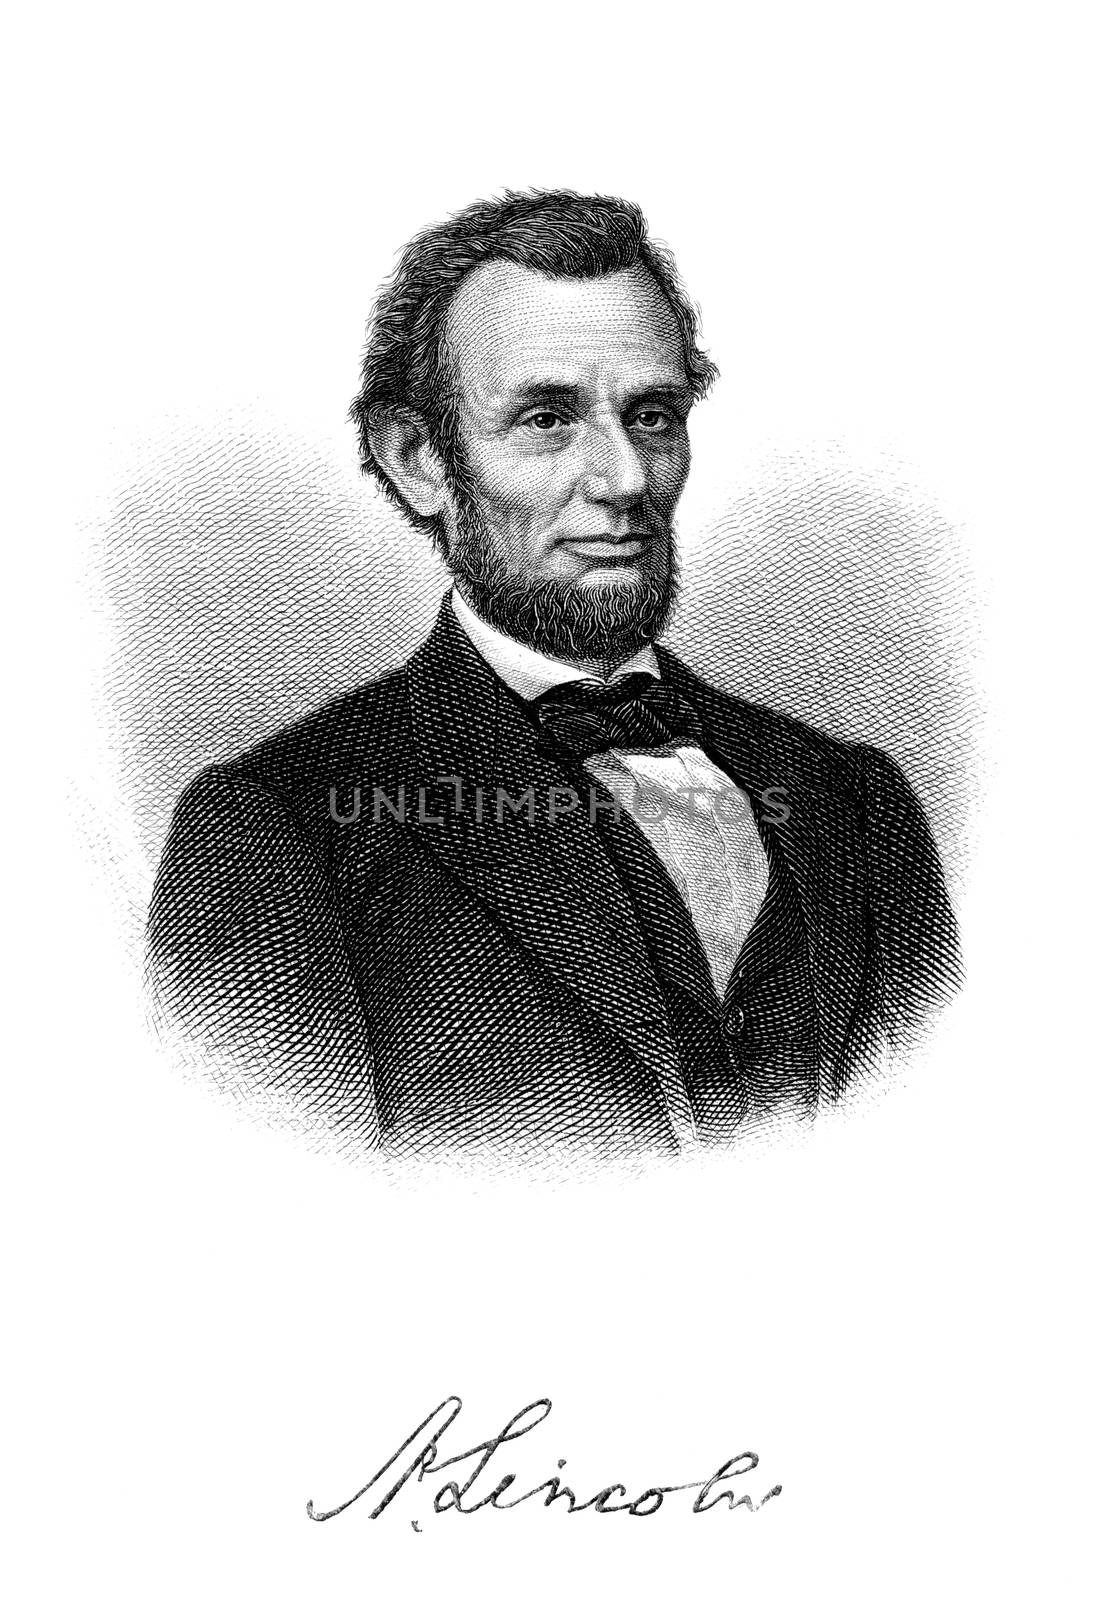 An engraved portrait image of  the USA president Abraham Lincoln by ant